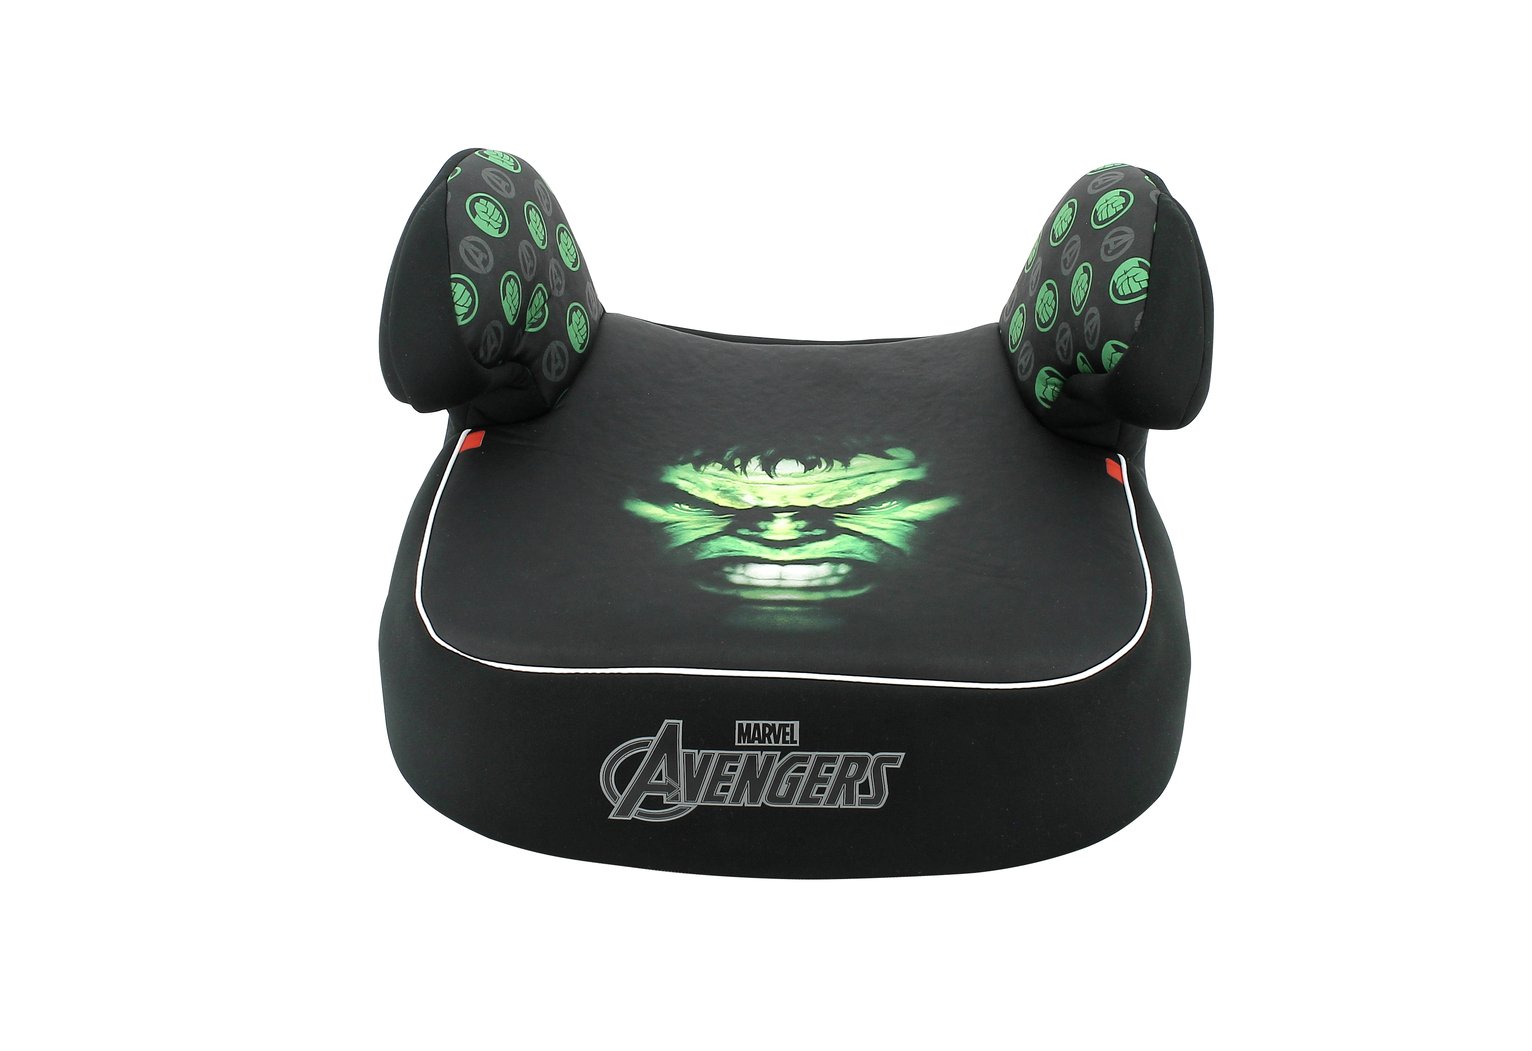 Marvel Avengers Incredible Hulk Dream Group 2/3 Booster Seat Review